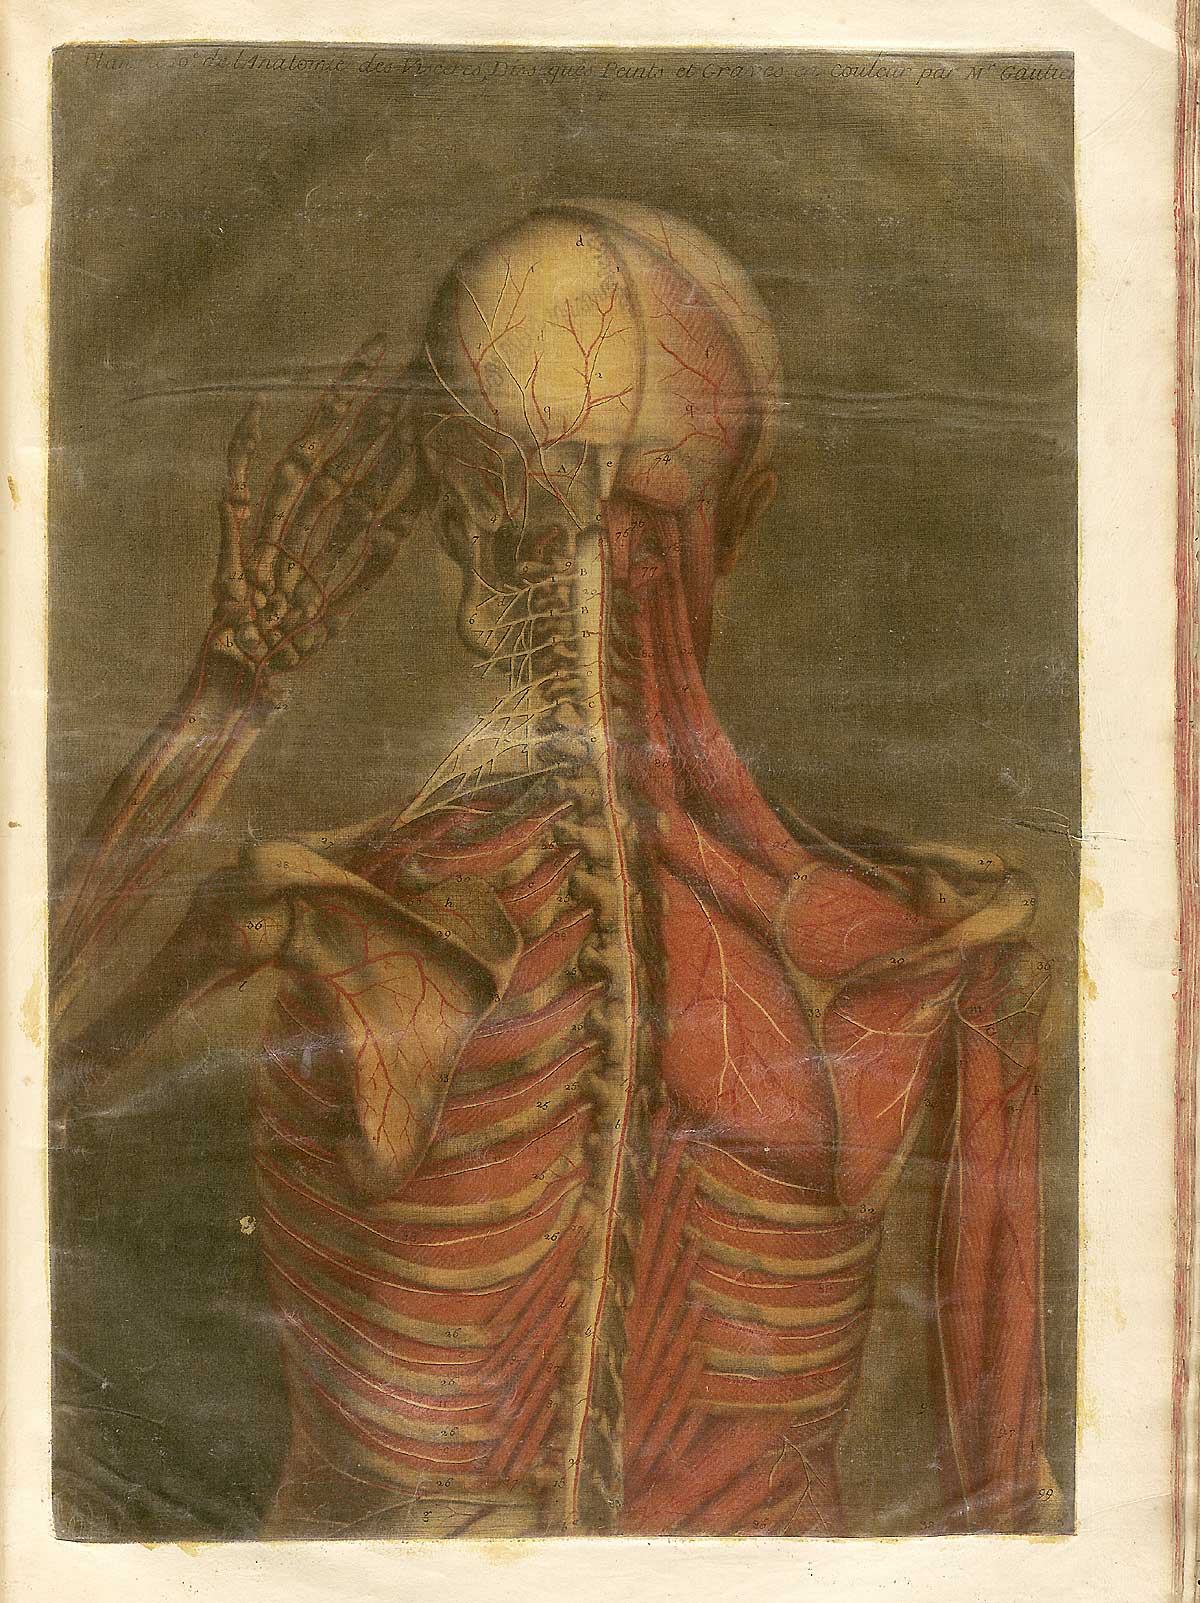 Color mezzotint of a human figure viewed from behind with most of the flesh removed to reveal the muscles and skeleton of the back of the head, shoulders and back; from Jacques Fabian Gautier d’Agoty’s Anatomie générale des viscères en situation, NLM Call no.: WZ 260 G283c 1745.